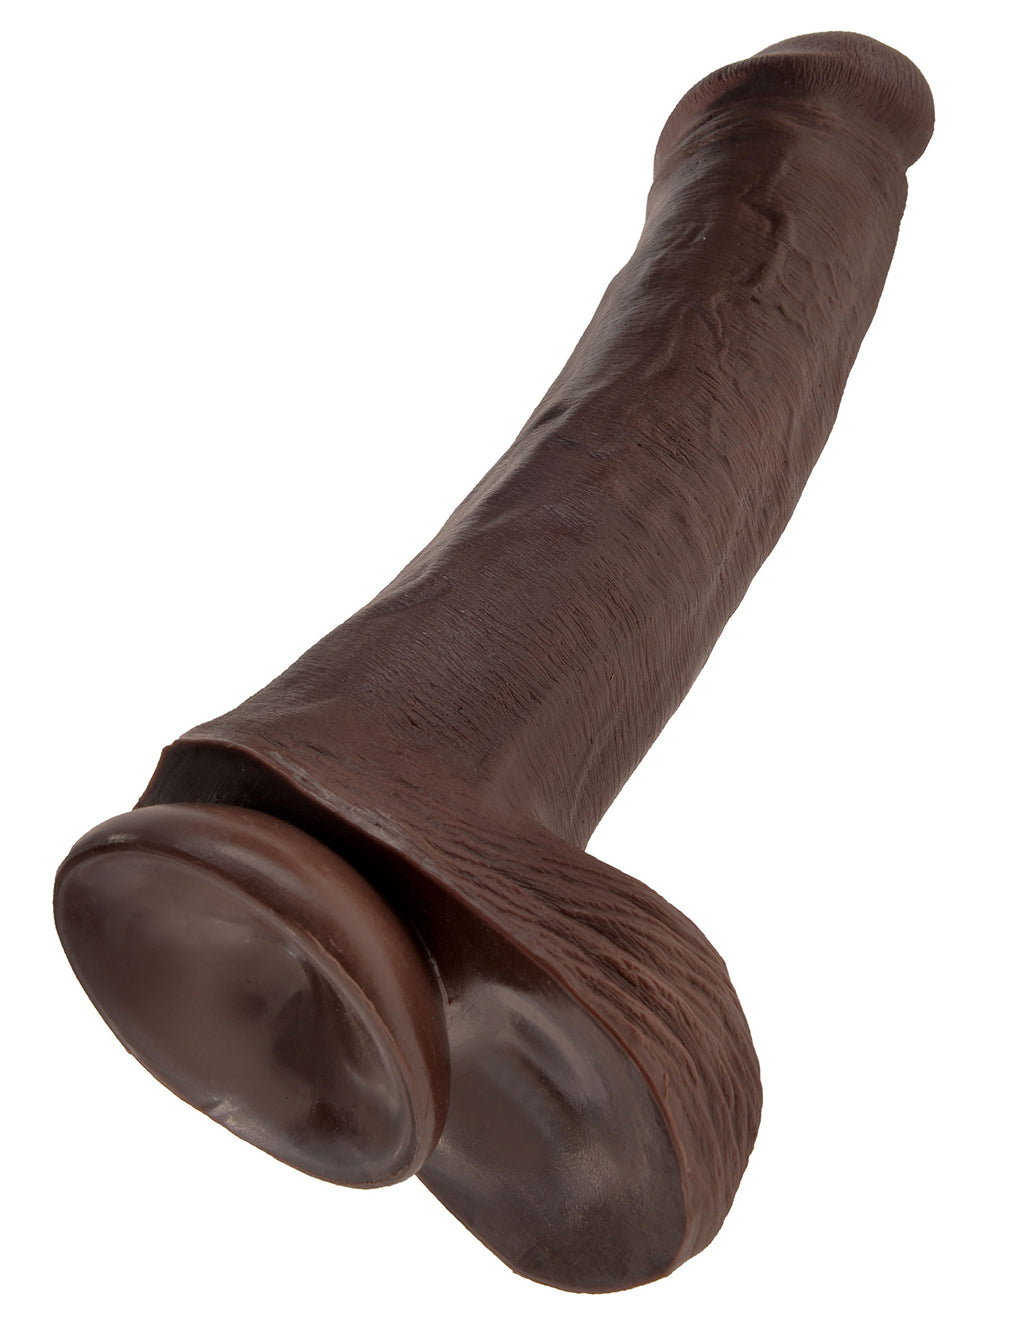 King Cock 13 Inch Cock with Balls and Suction Cup- Chocolate- Suction cup